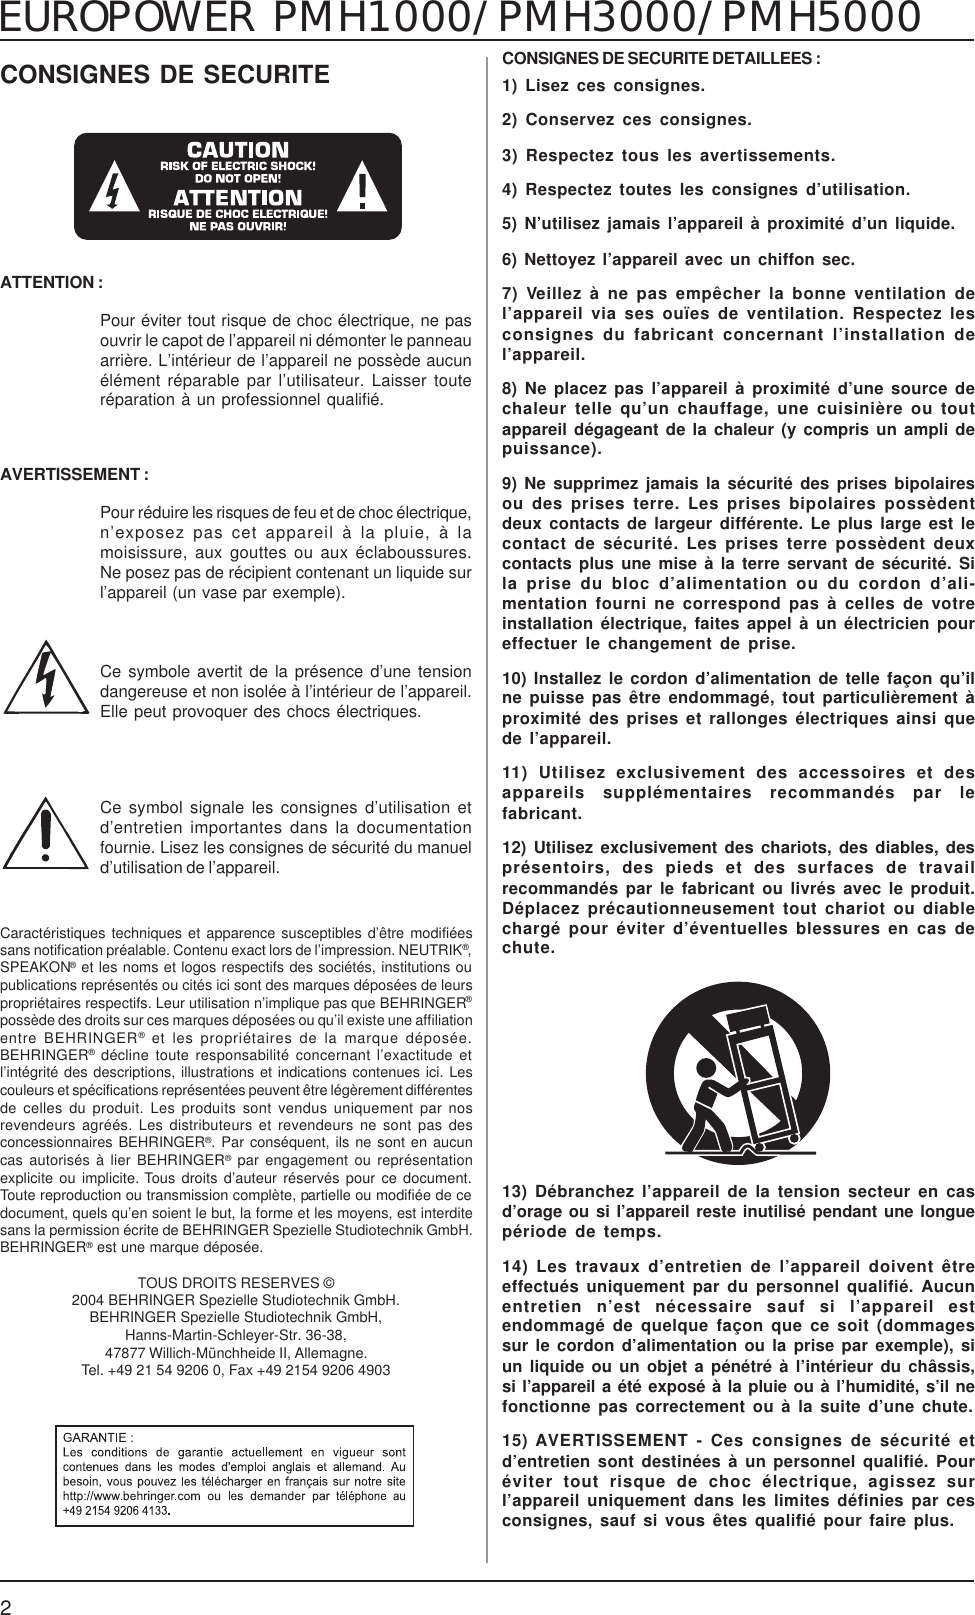 Page 2 of 12 - Behringer PMH1000 User Manual (French) P0115 M FR